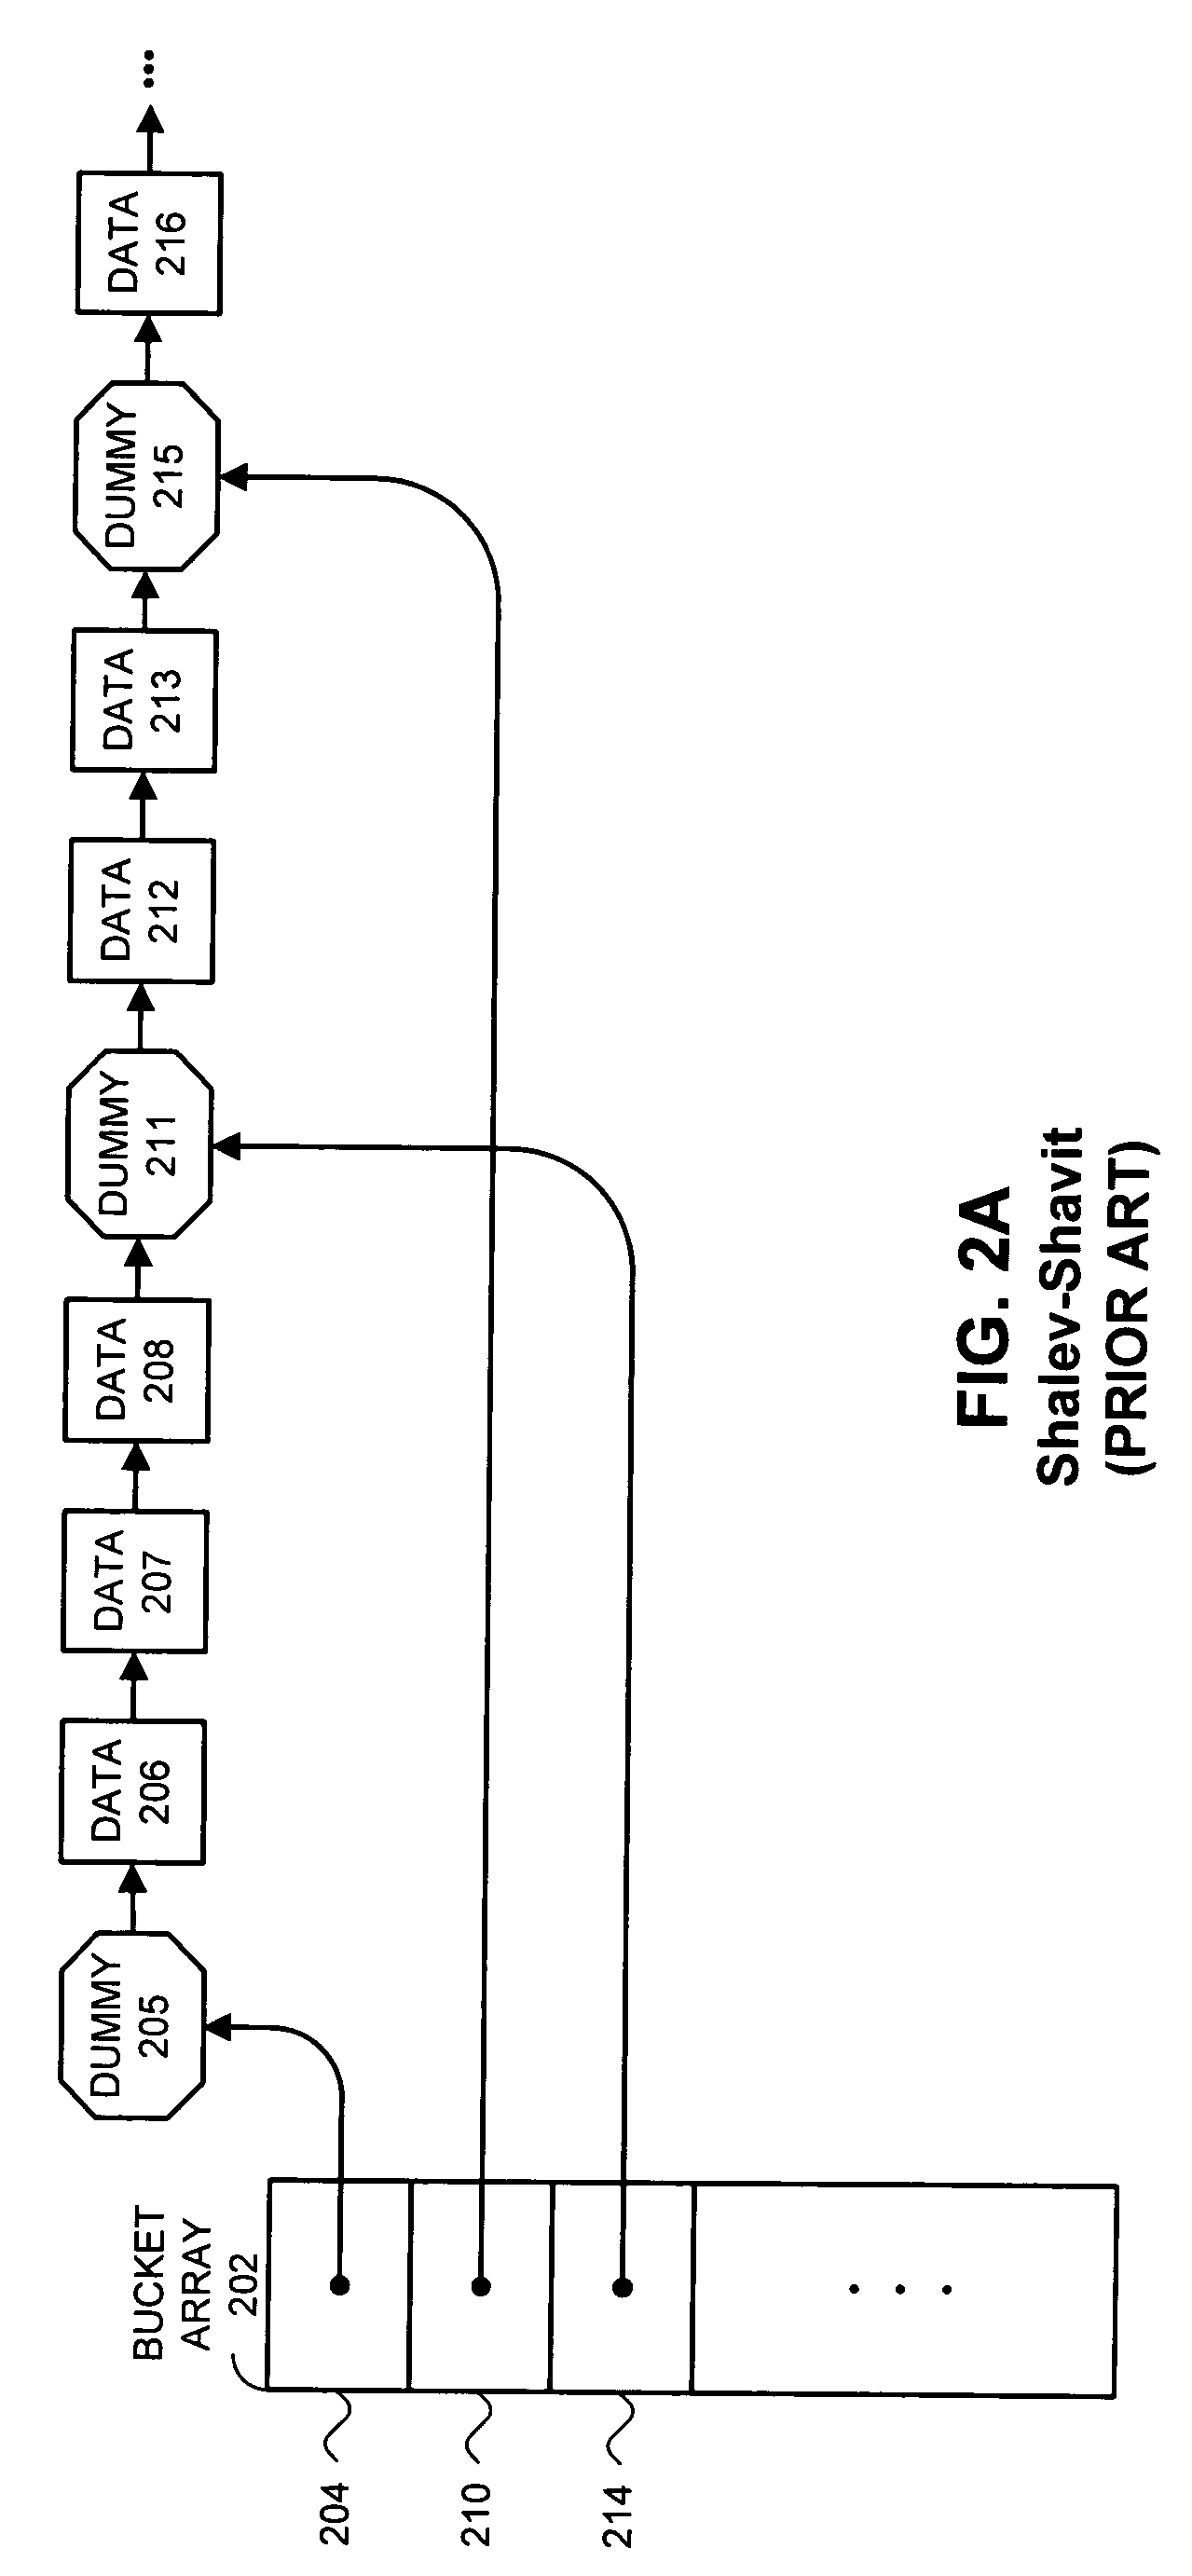 Method and apparatus for implementing a fully dynamic lock-free hash table